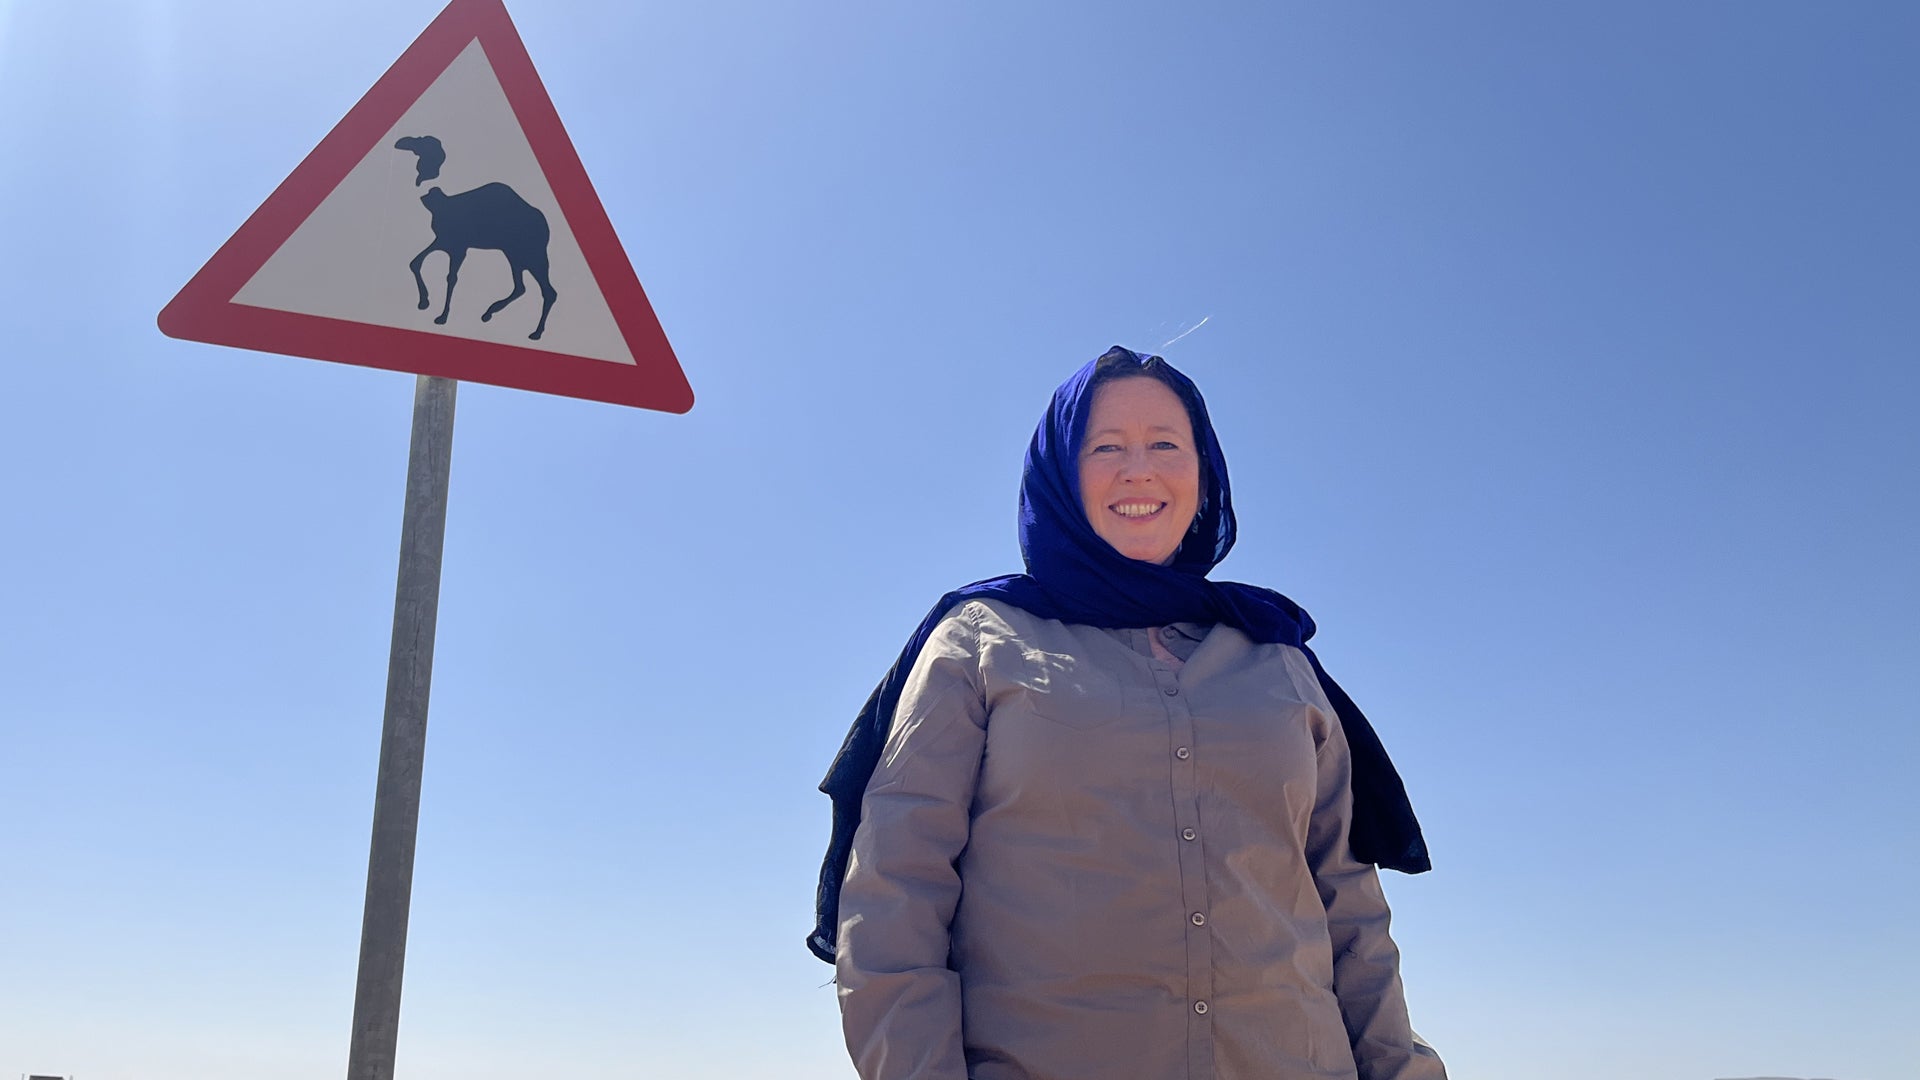 Camel crossing: on a 3000-km round trip, our adventurer got a good experience driving in Saudi